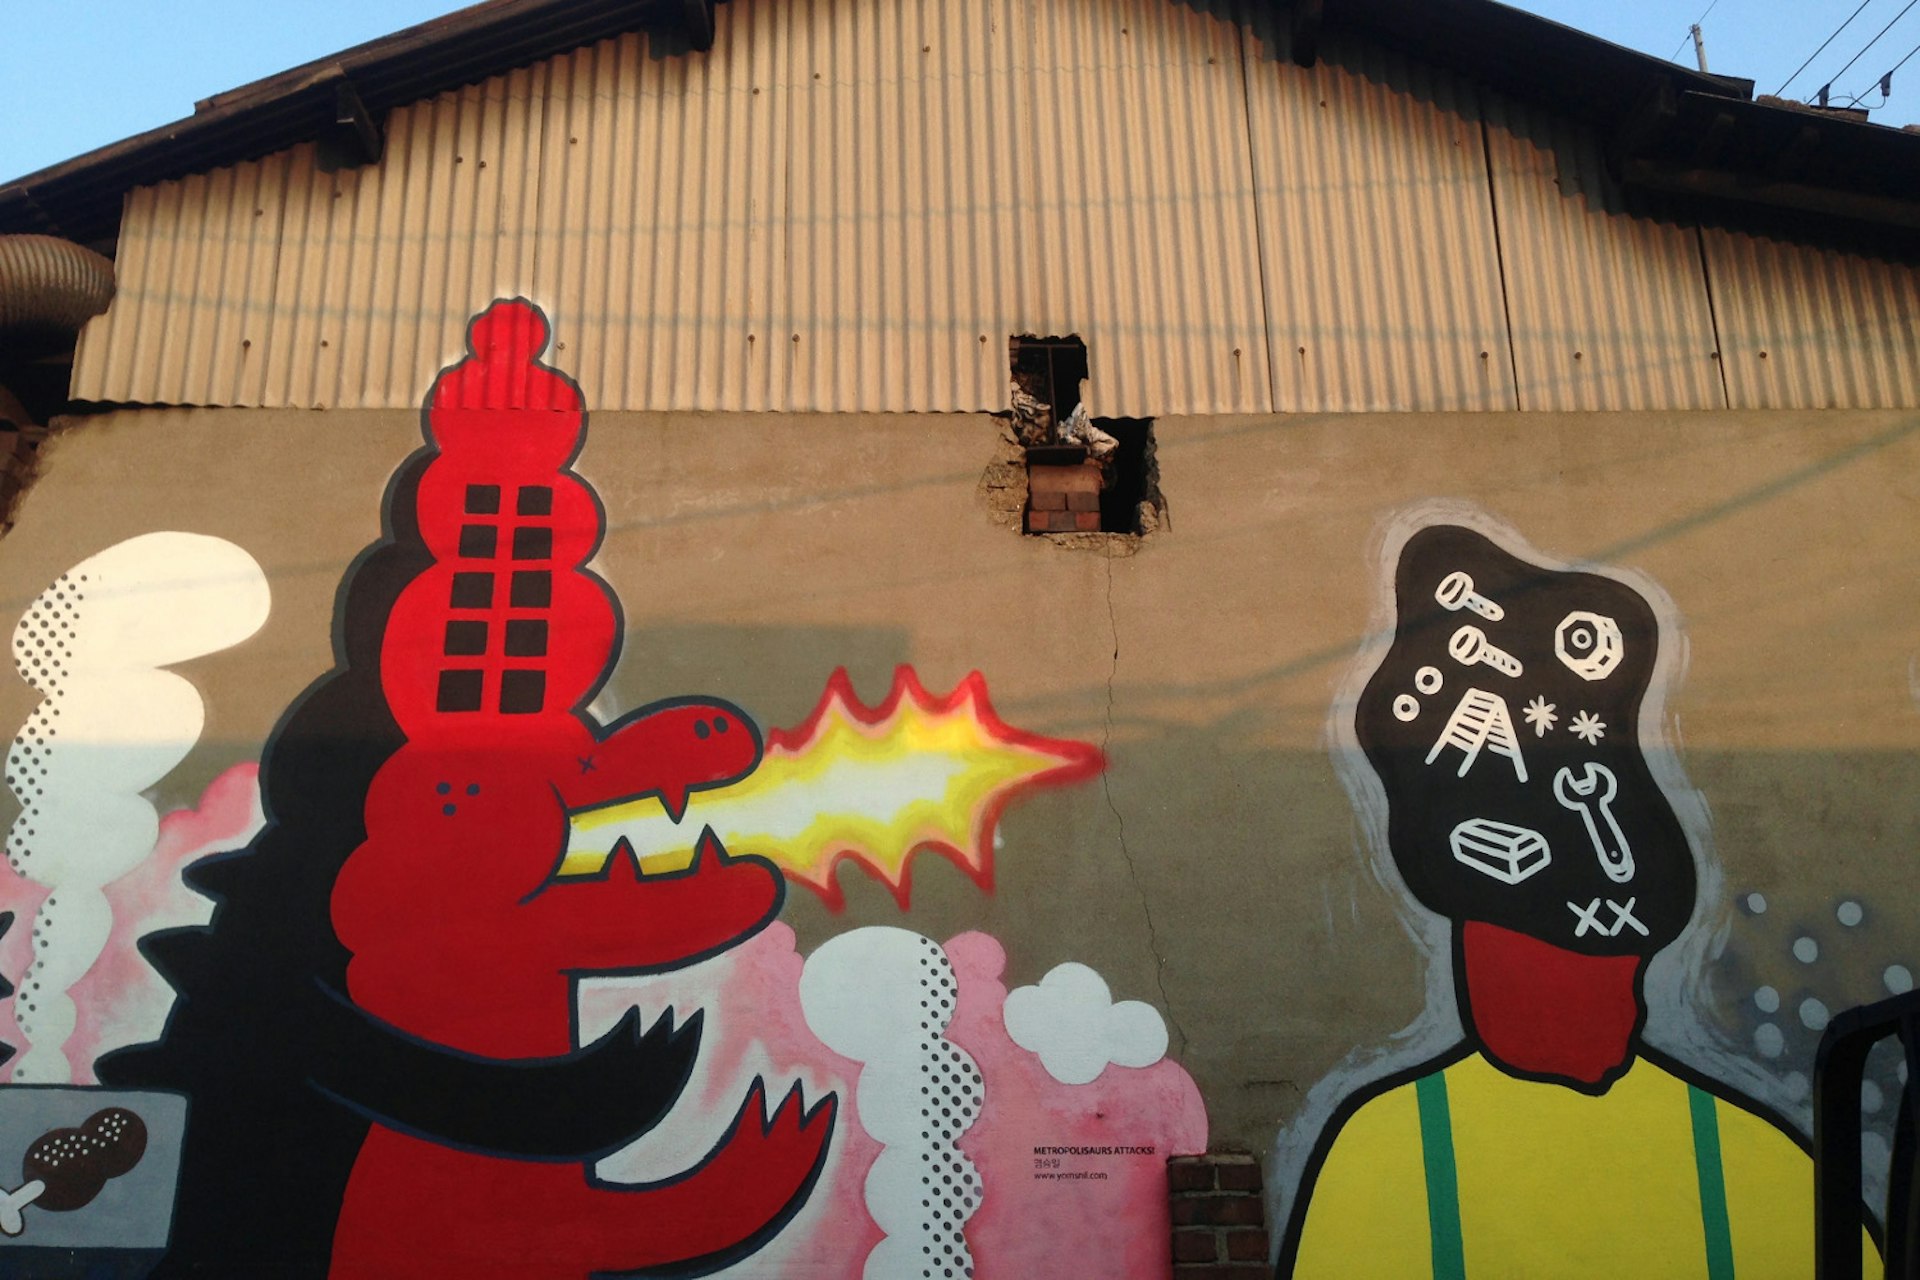 Colourful murals in Mullae Art Village. Image by Simon Richmond / Lonely Planet